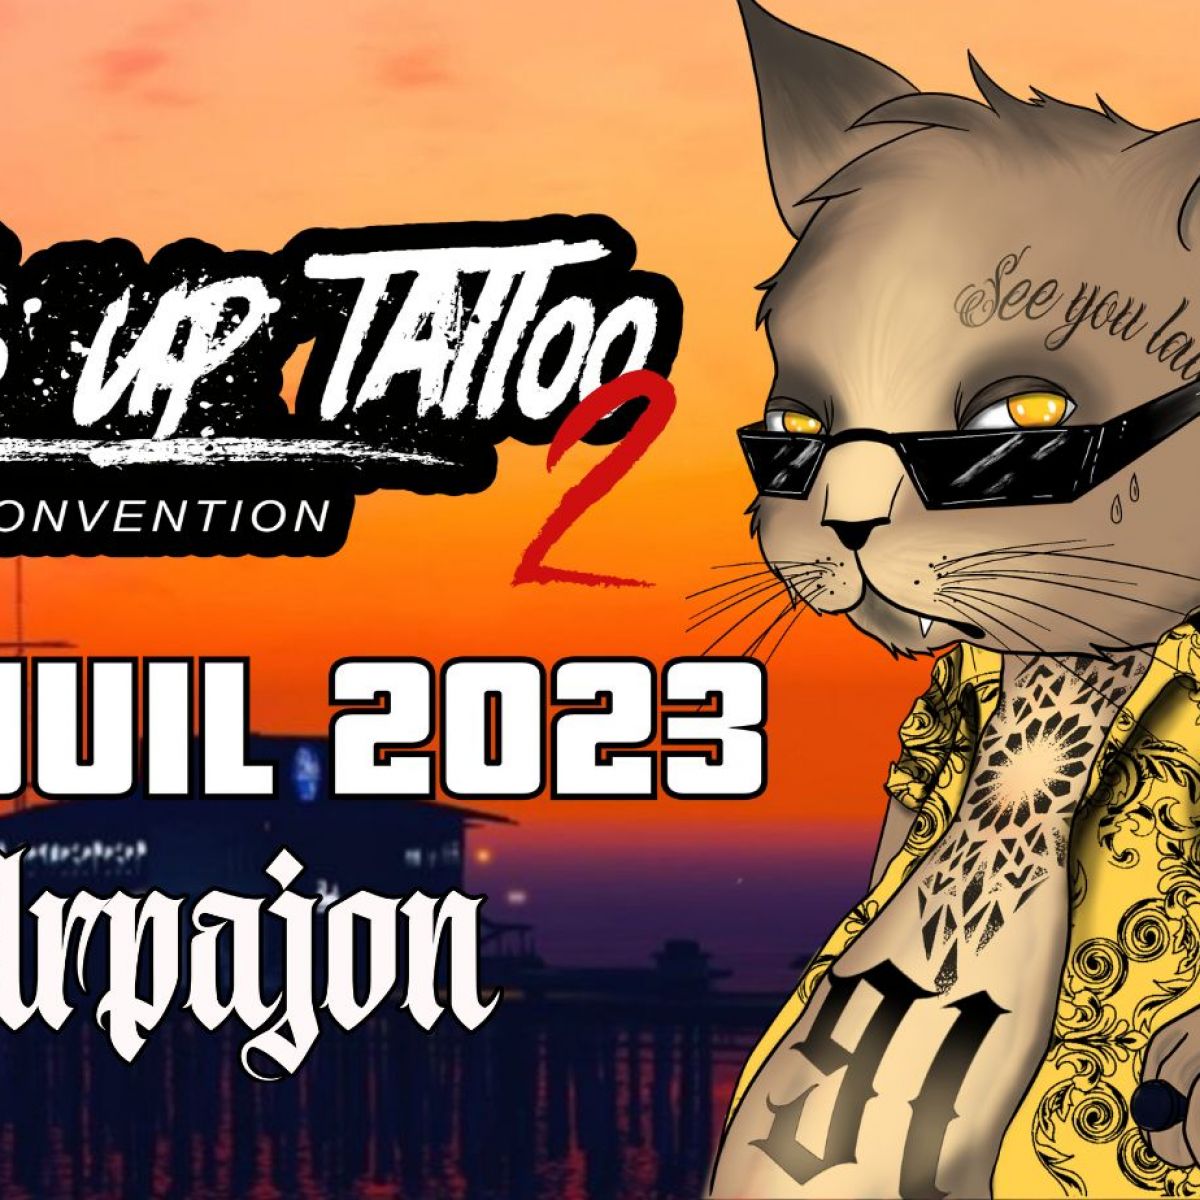 Upcoming Tattoo Conventions Calendar 2022  2023  World Tattoo Events